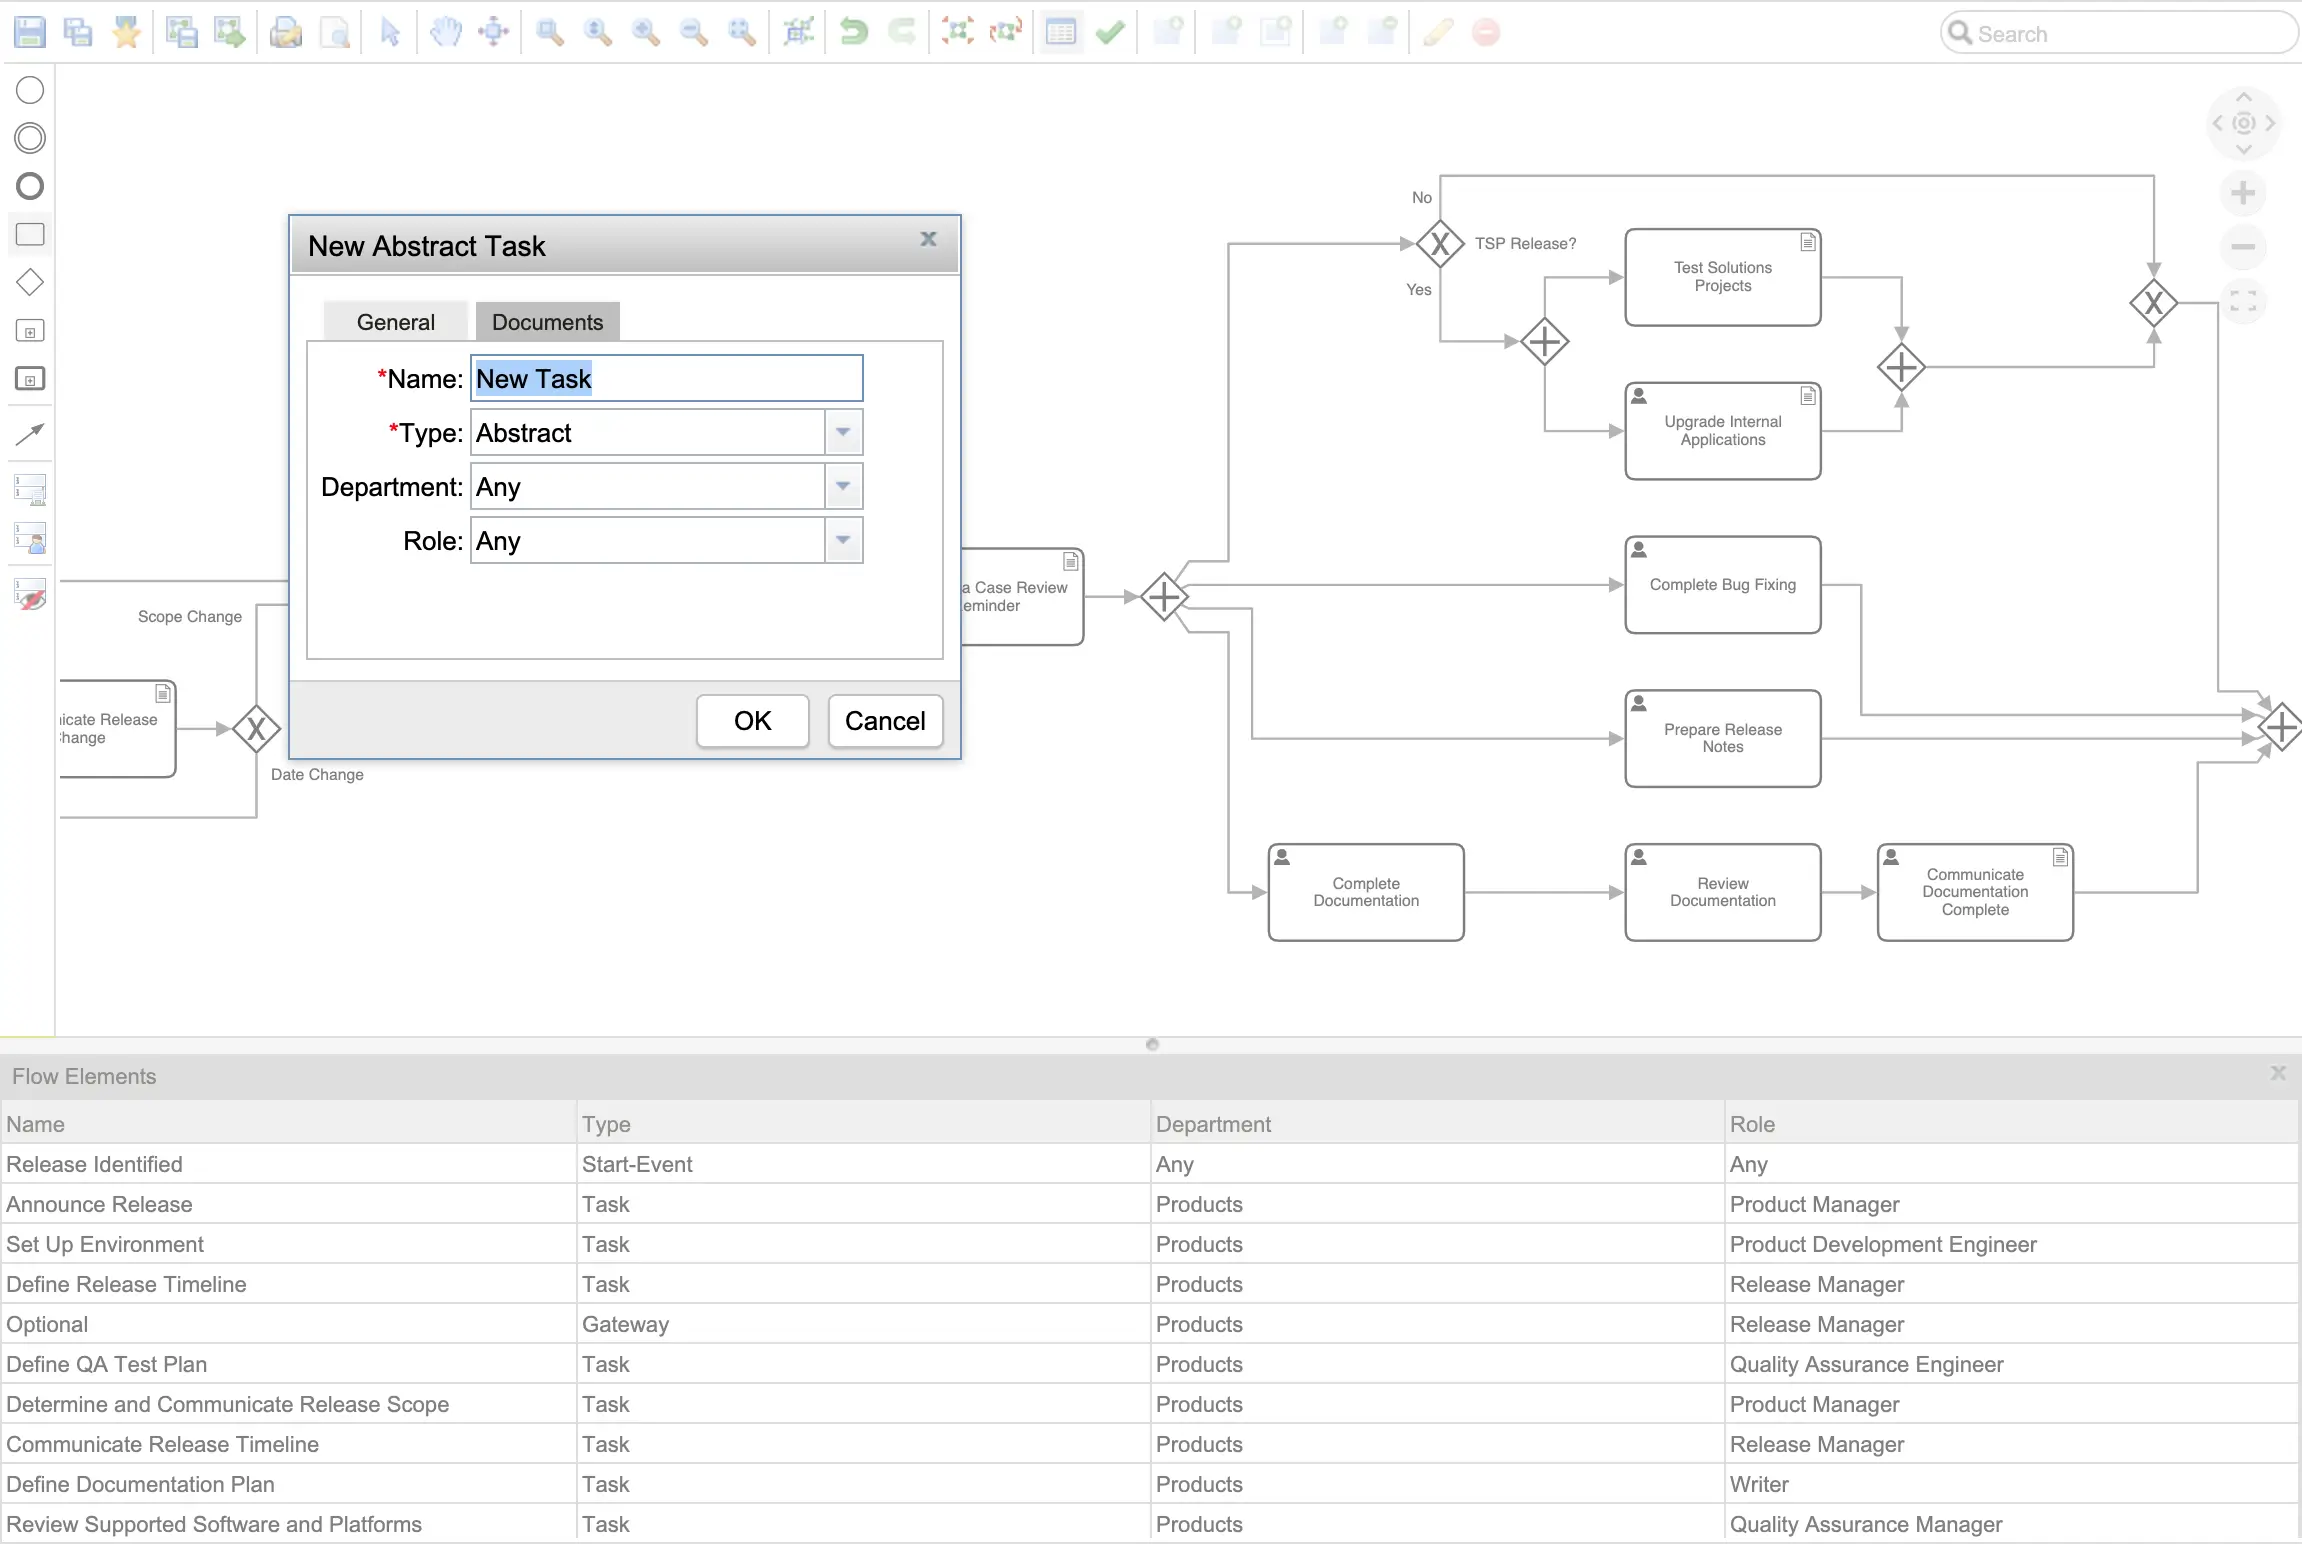 Efficiently create and visualize processes in the Business Process Modeling module